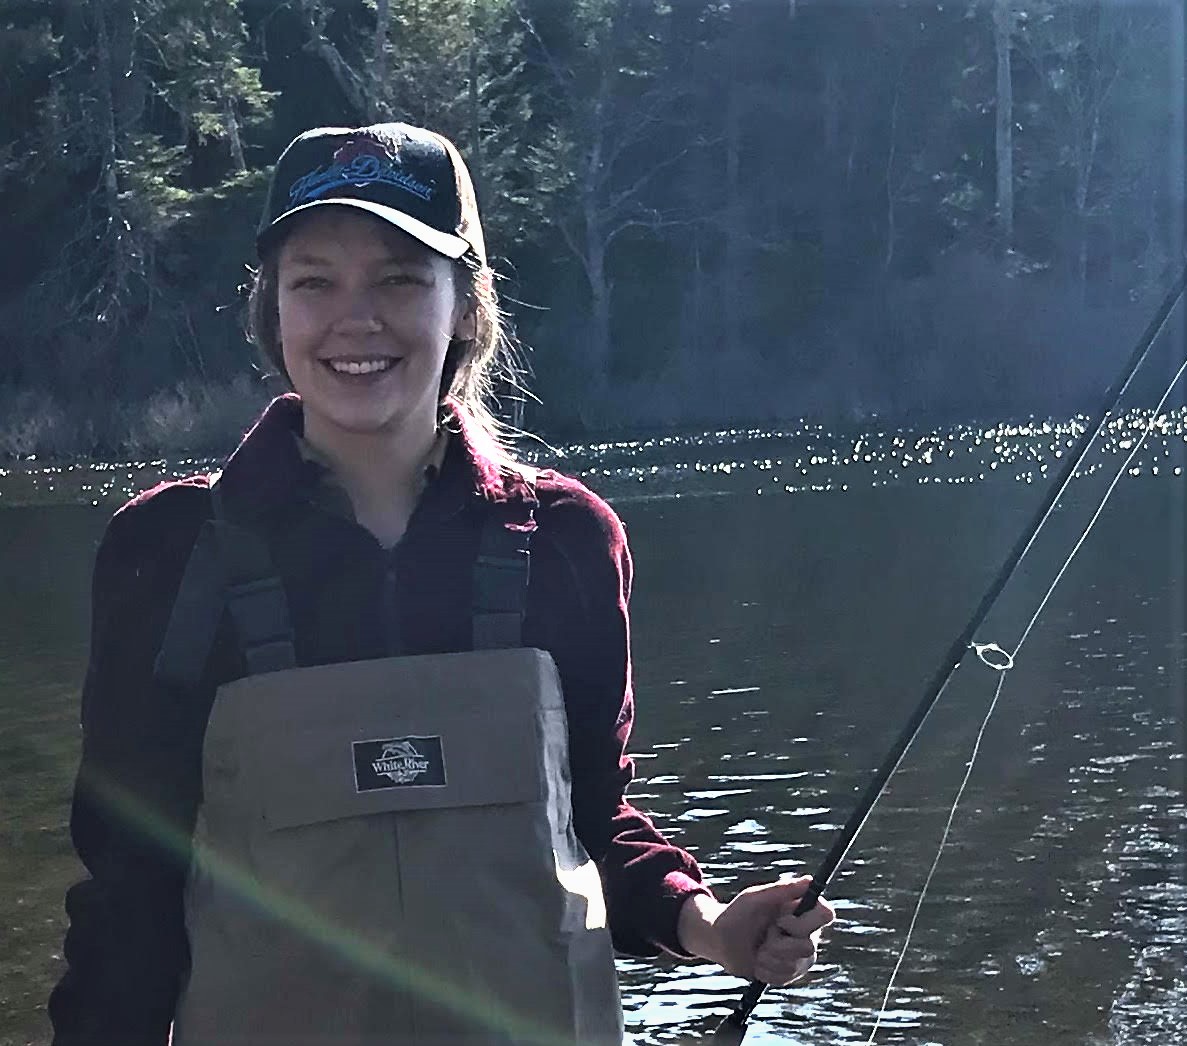 Jenna wearing waders and fleece jacket in a river, holding a fishing rod